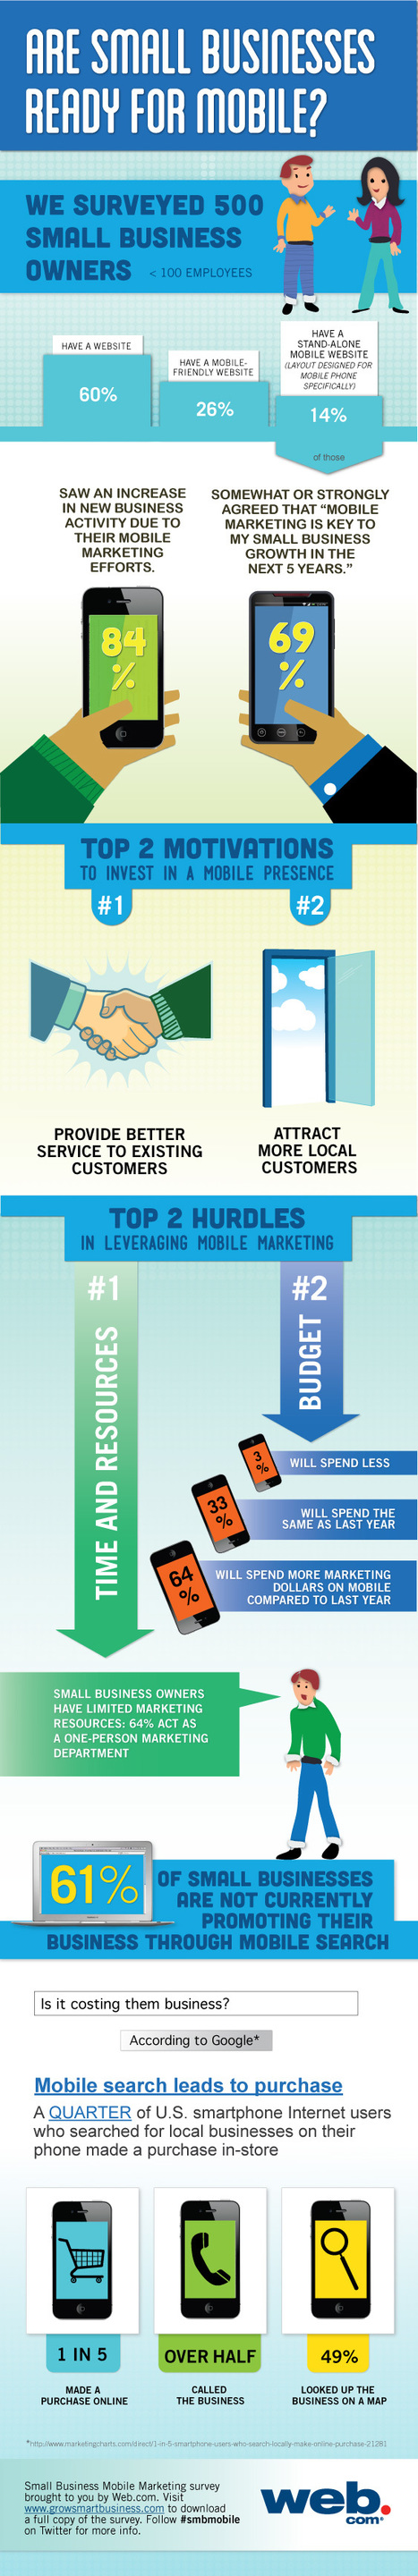 Are Small Businesses Ready for Mobile (infographic) | MarketingHits | Scoop.it